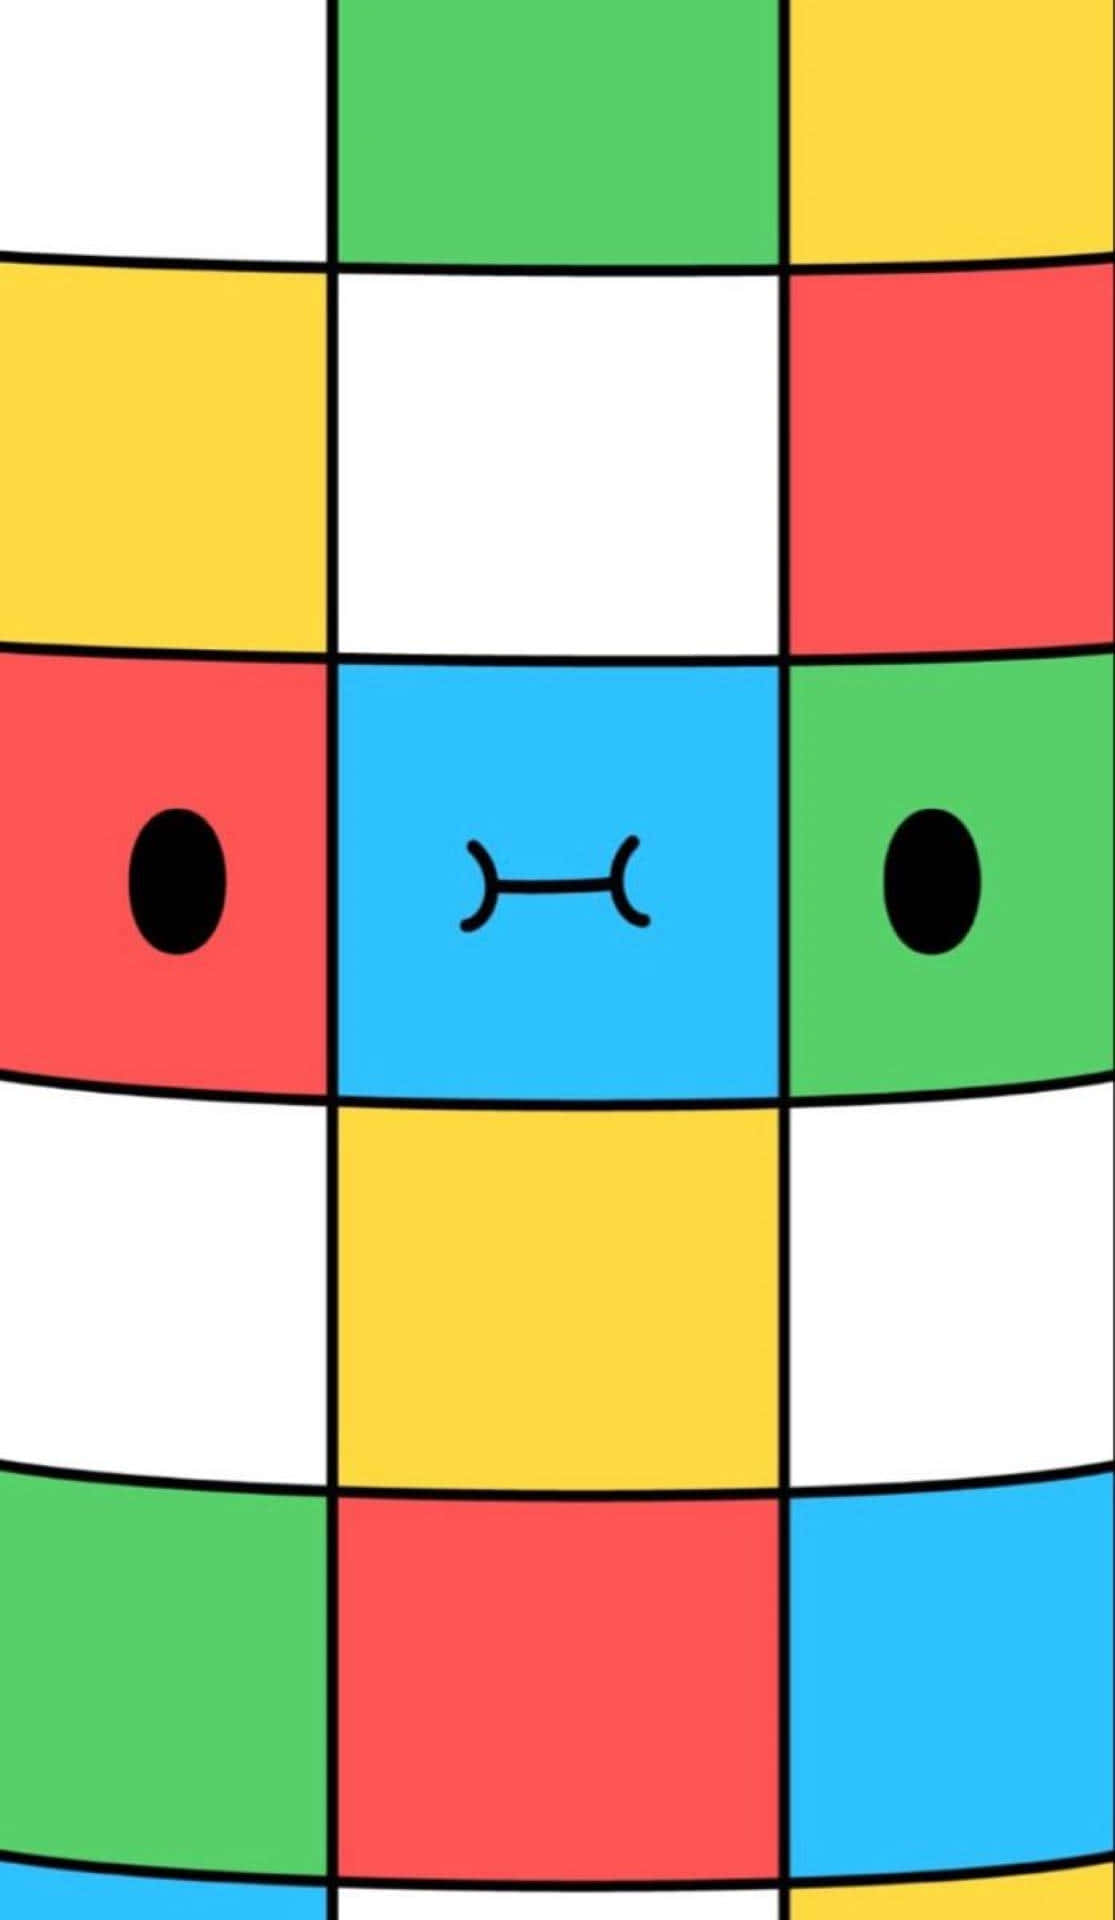 A Colorful Square With A Face On It